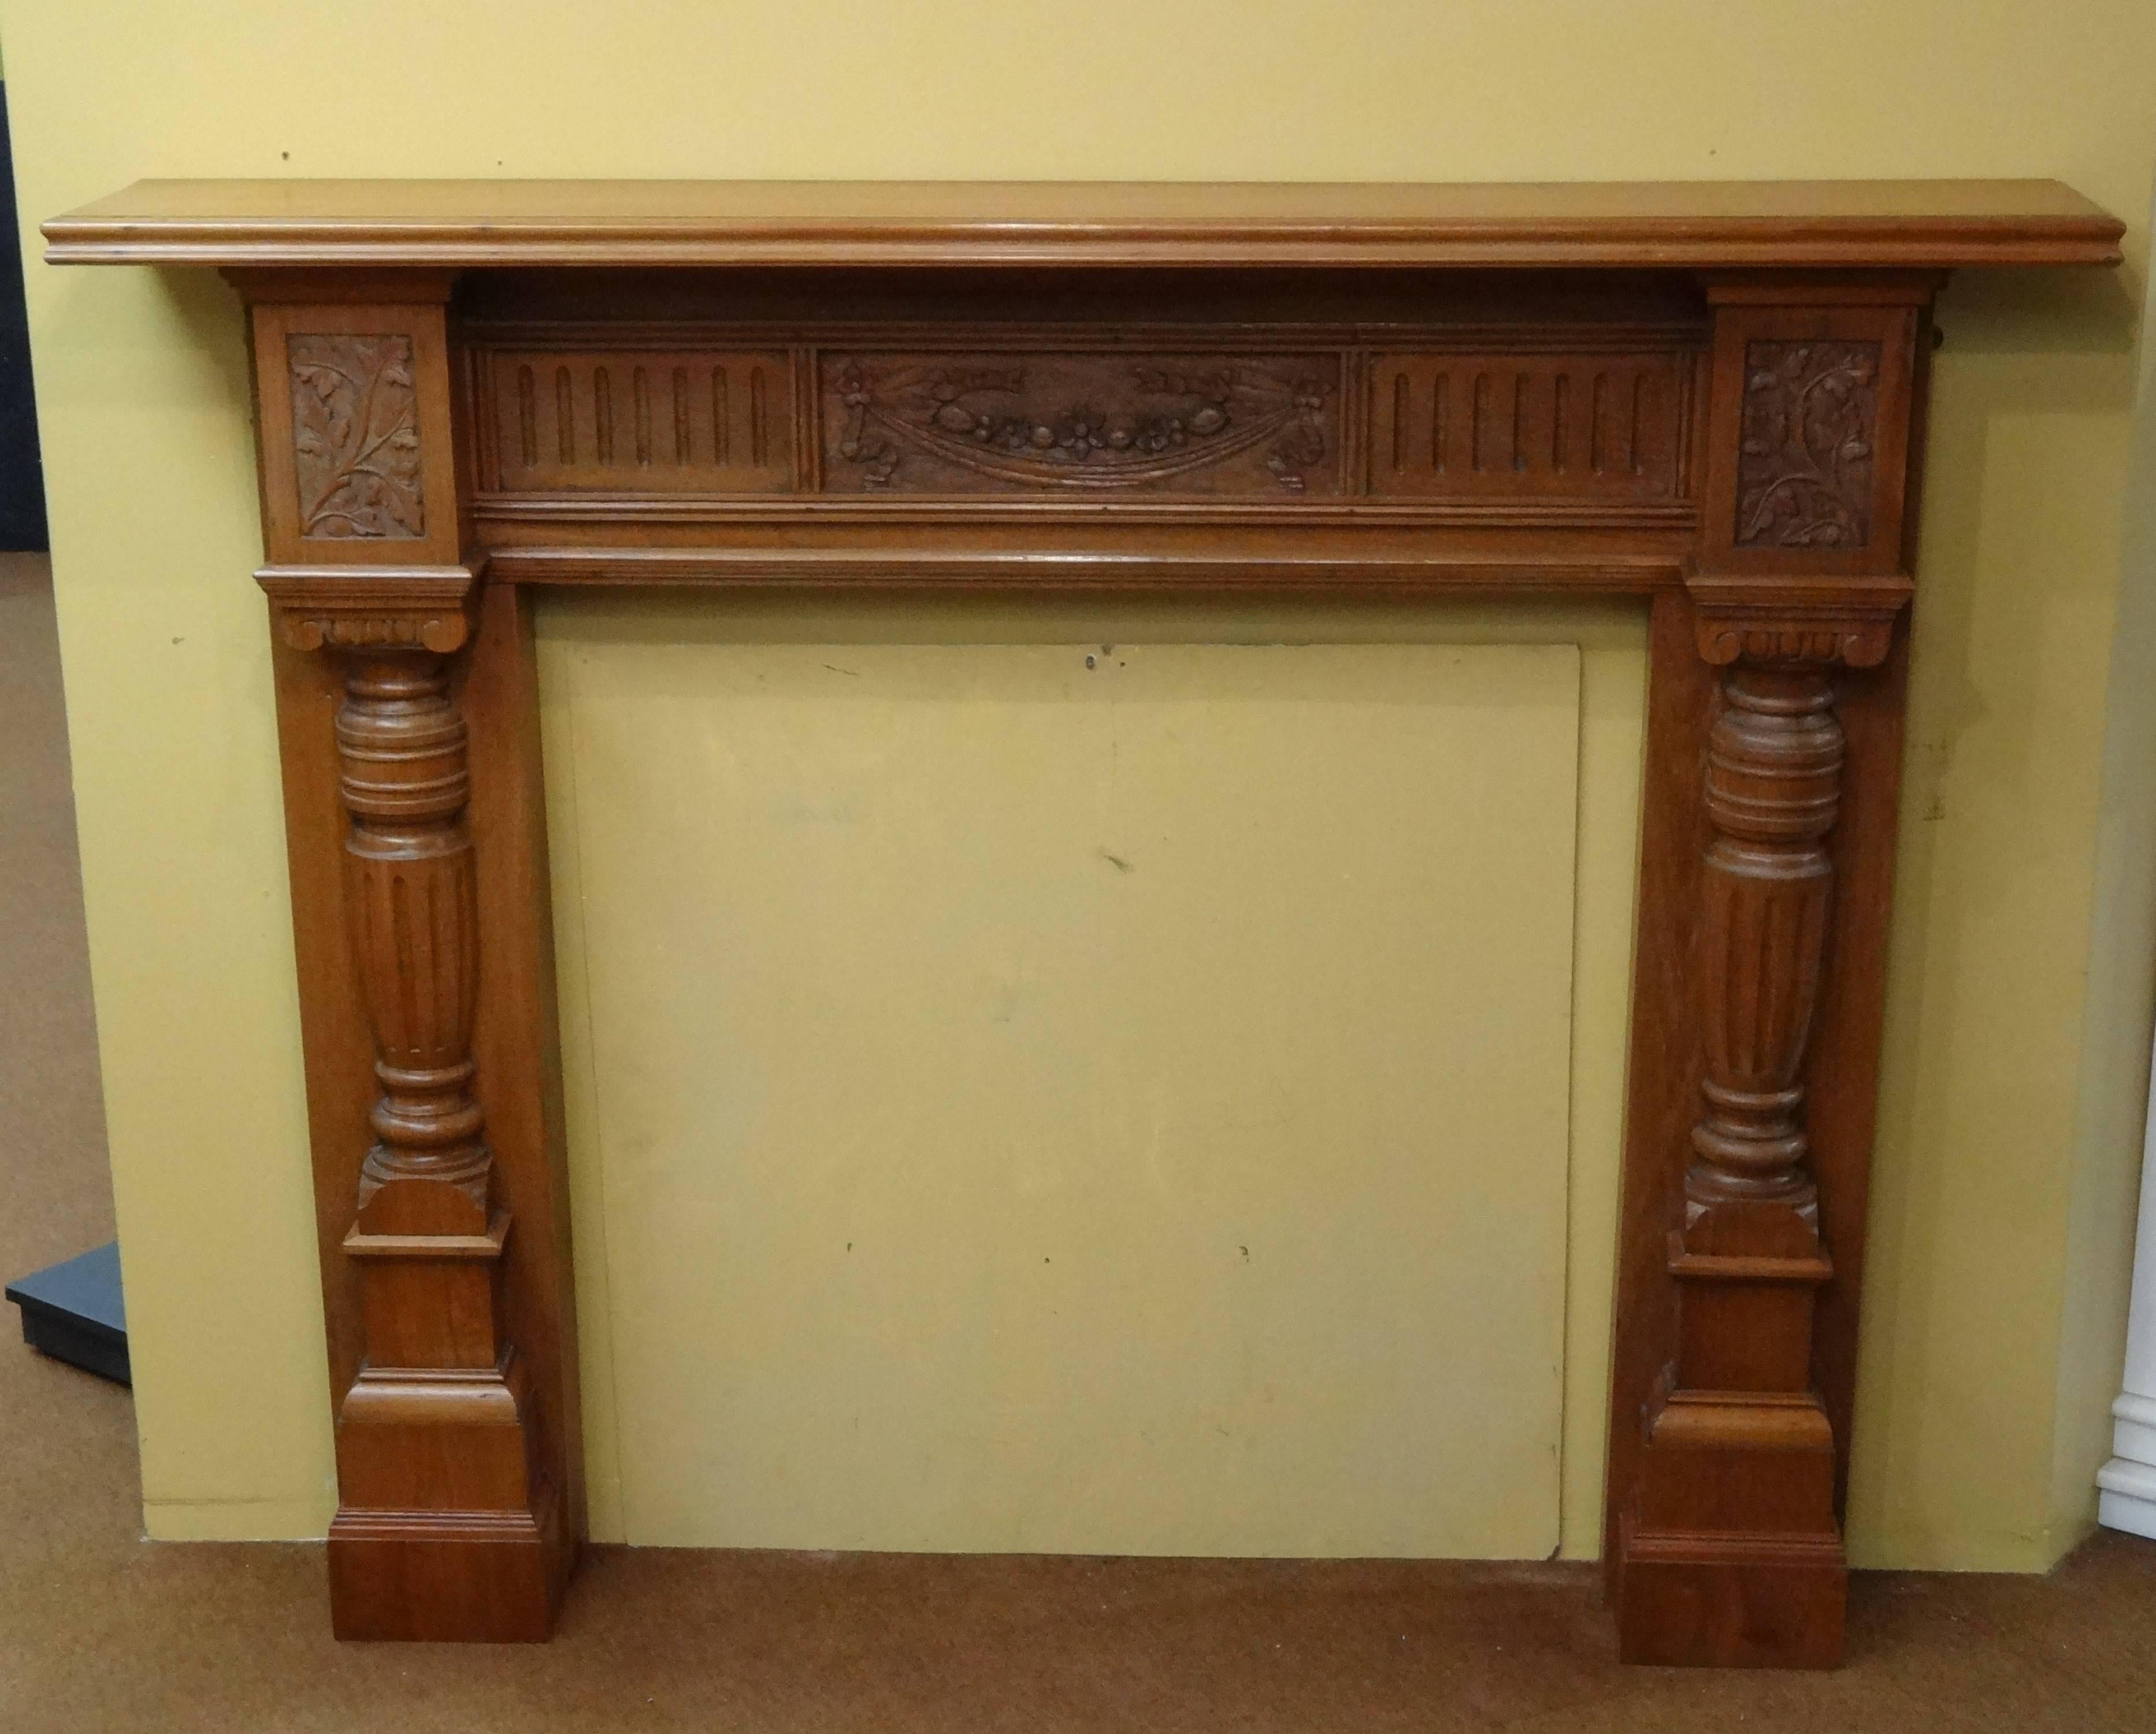 Reclaimed antique Edwardian hand-carved mahogany fireplace surround. In original reclaimed condition.

Approximate measurements:
Mantel width 68 inches / 172.7 cm
Mantel depth 10.25 inches / 26 cm
Height 53.5 inches / 135.8 cm
Base 57 inches /